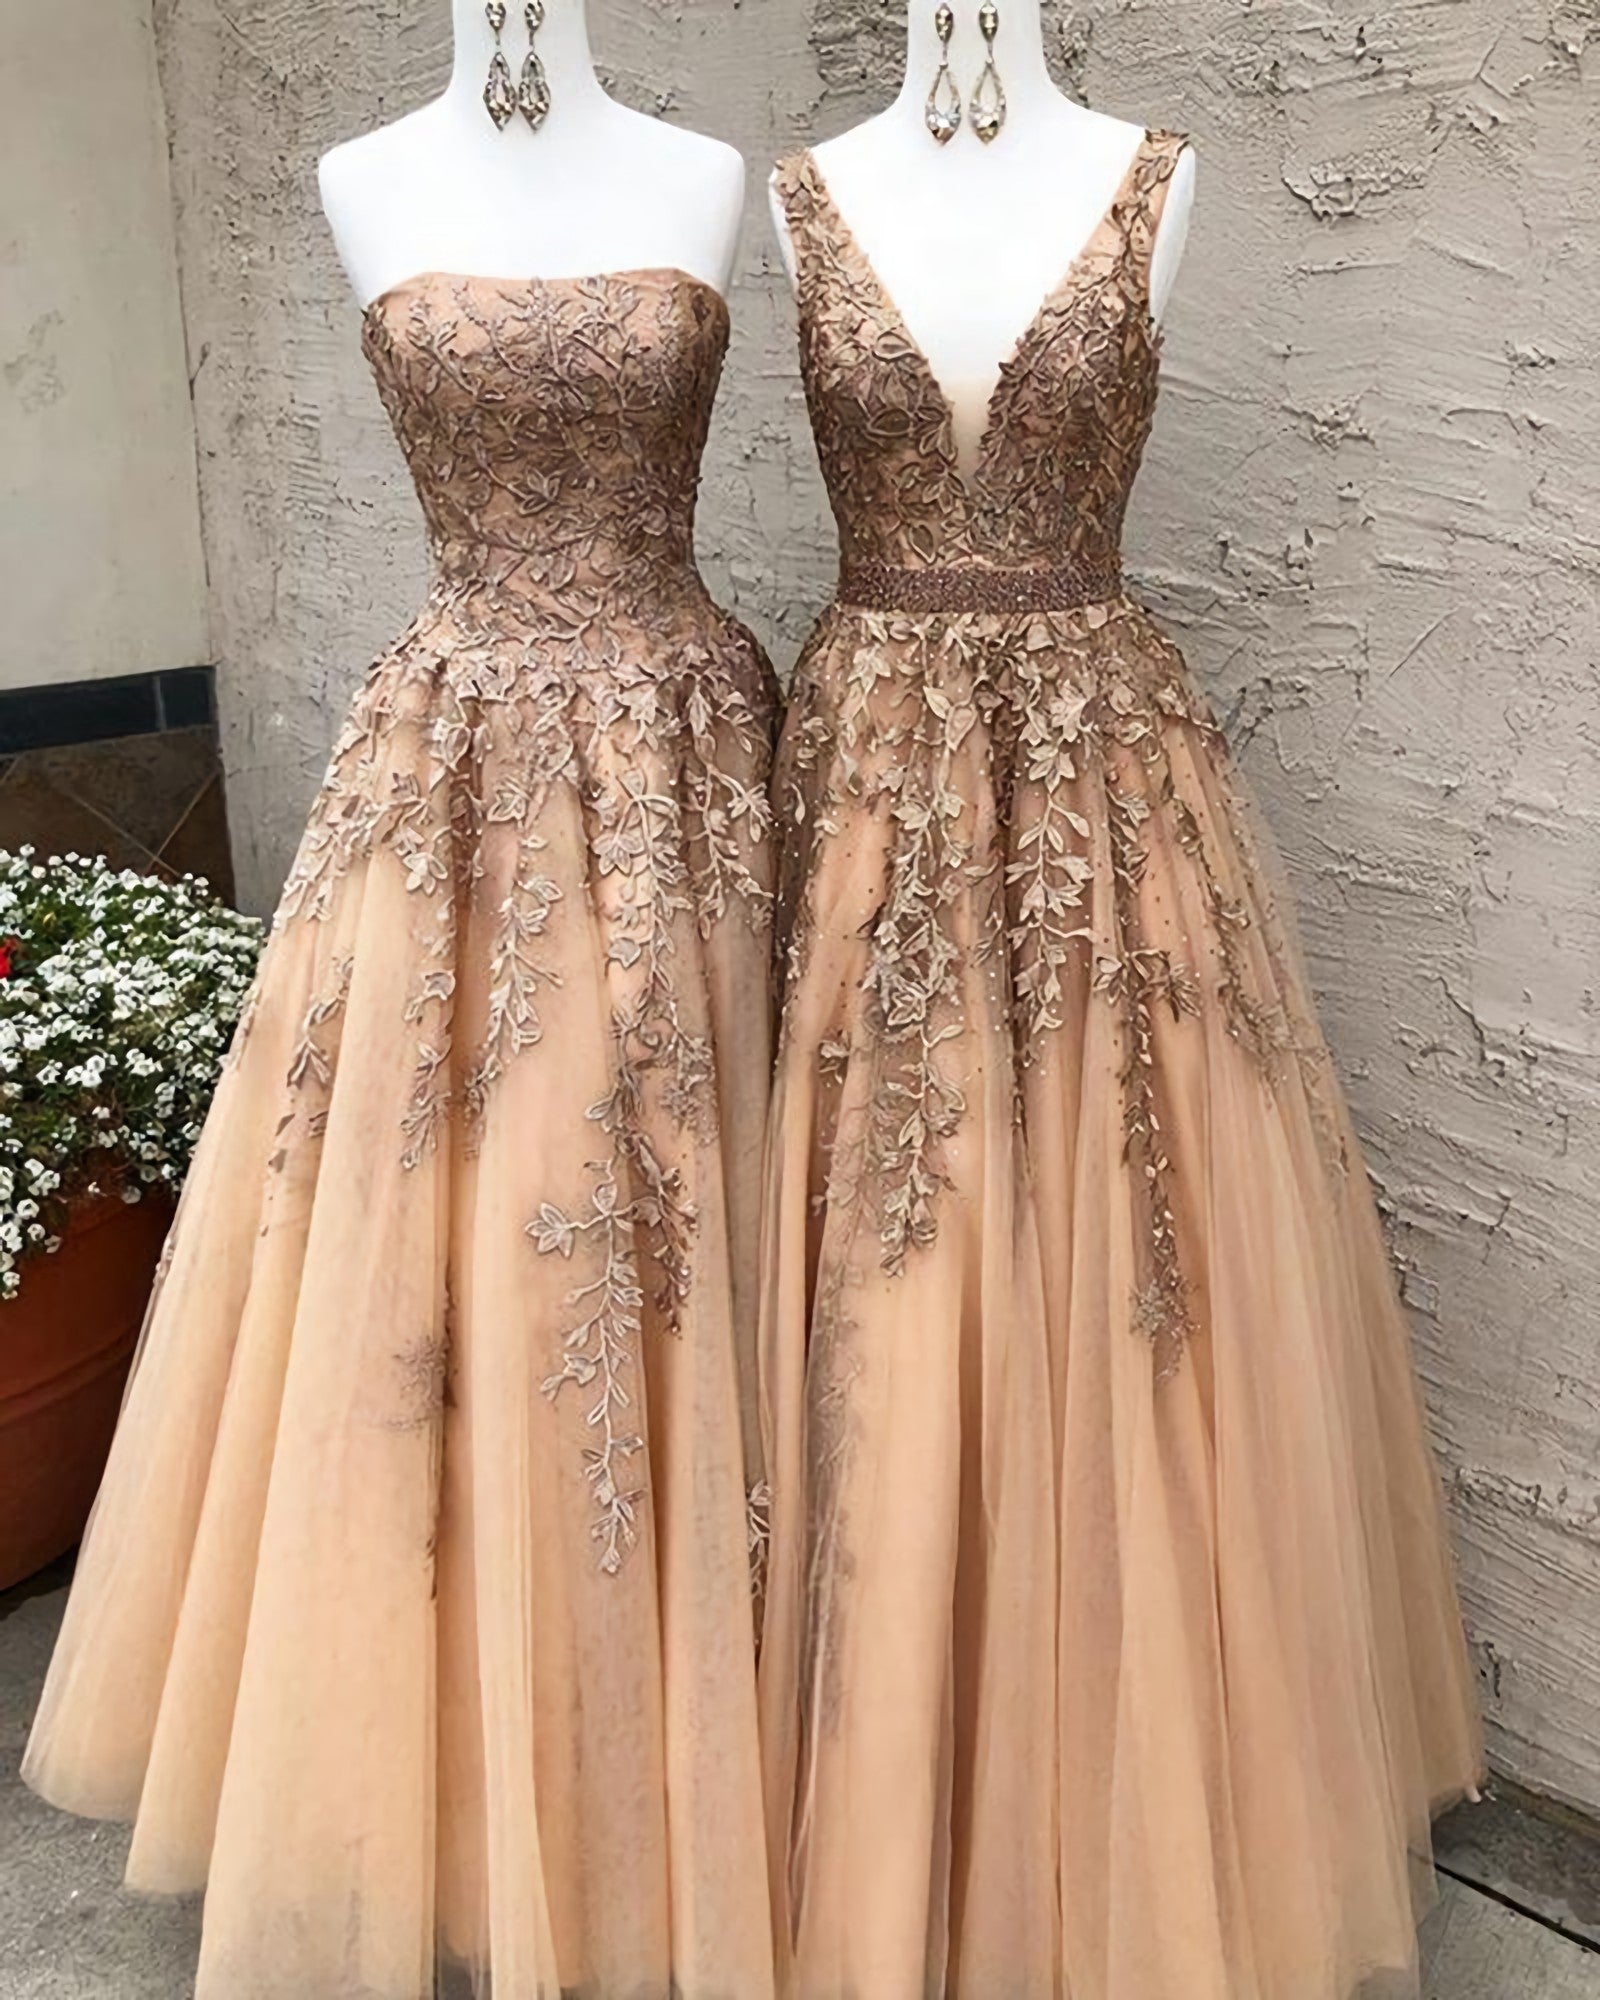 Long Champagne Corset Prom Dress, Sexy V Neck Strapless A Line Appliques Corset Formal Party Dresses outfit, Homecoming Dresses Black Girl